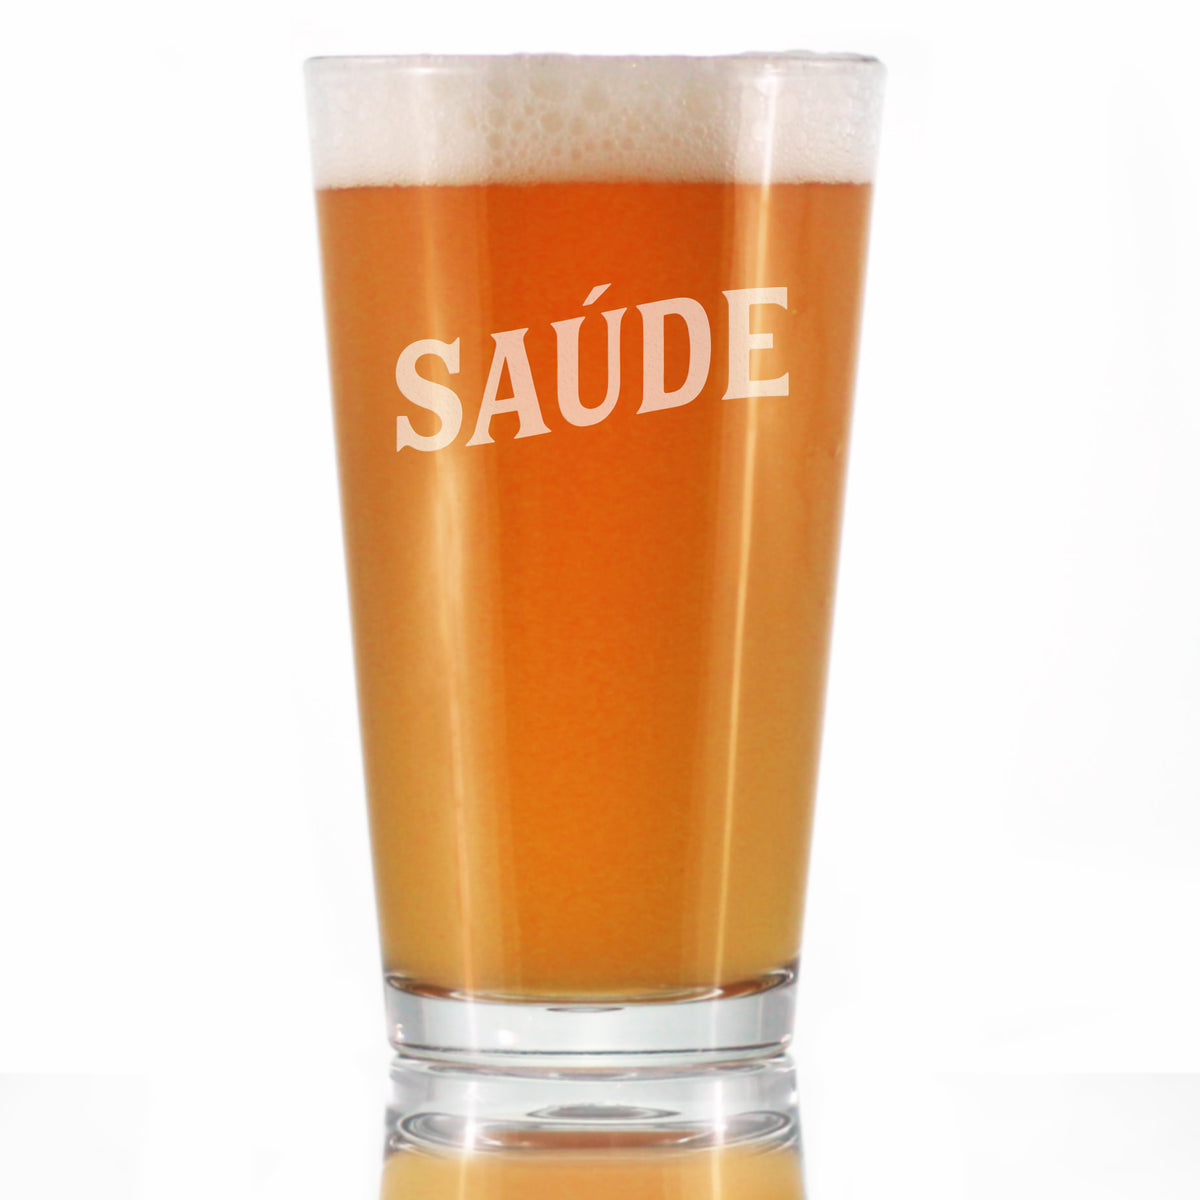 Saude - Portuguese Cheers - Pint Glass for Beer - Cute Brazil Themed Gifts or Party Decor for Women and Men - 16 Oz